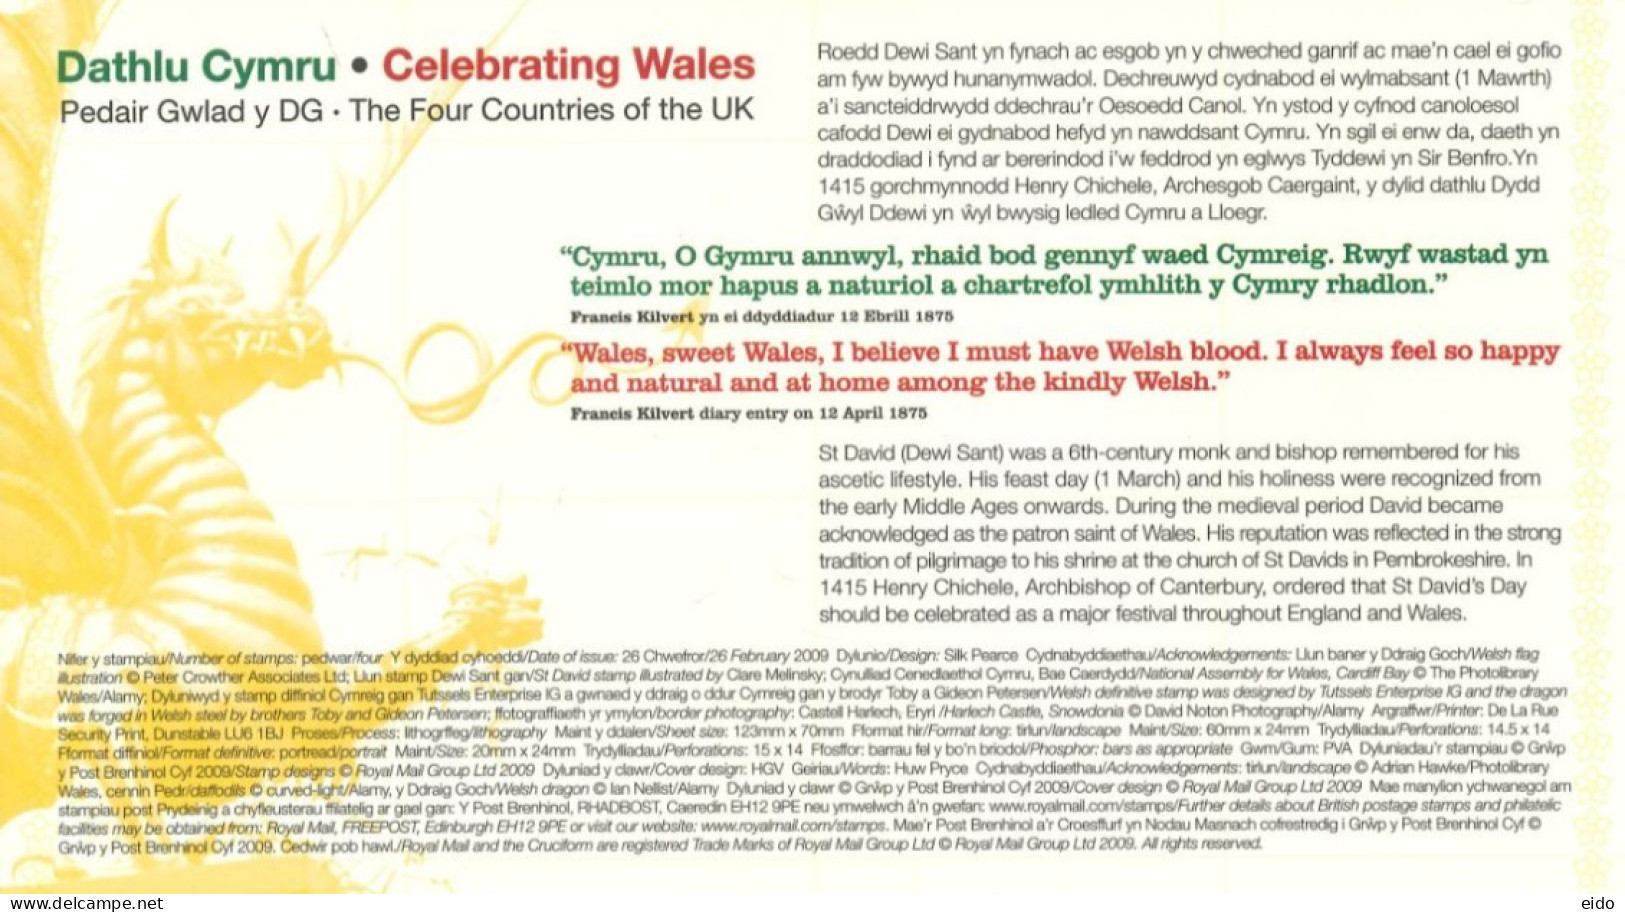 GREAT BRITAIN - 2009, FDC MINIATURE STAMPS SHEET OF DATHLU CYMRU CEEBRATING WALES. - Covers & Documents